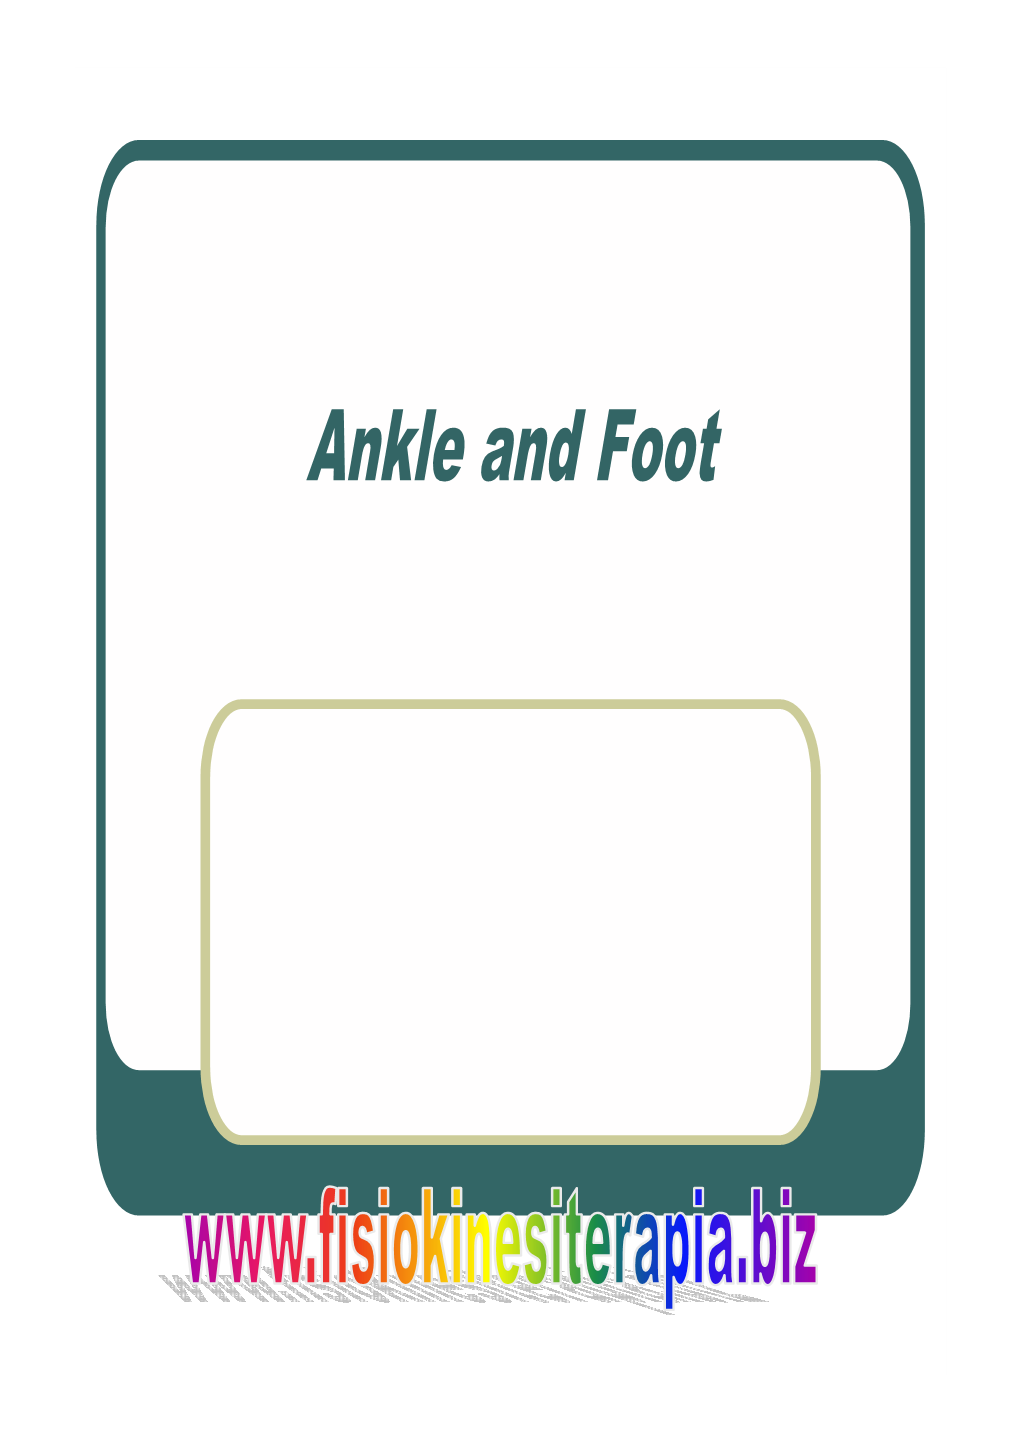 Ankle and Foot